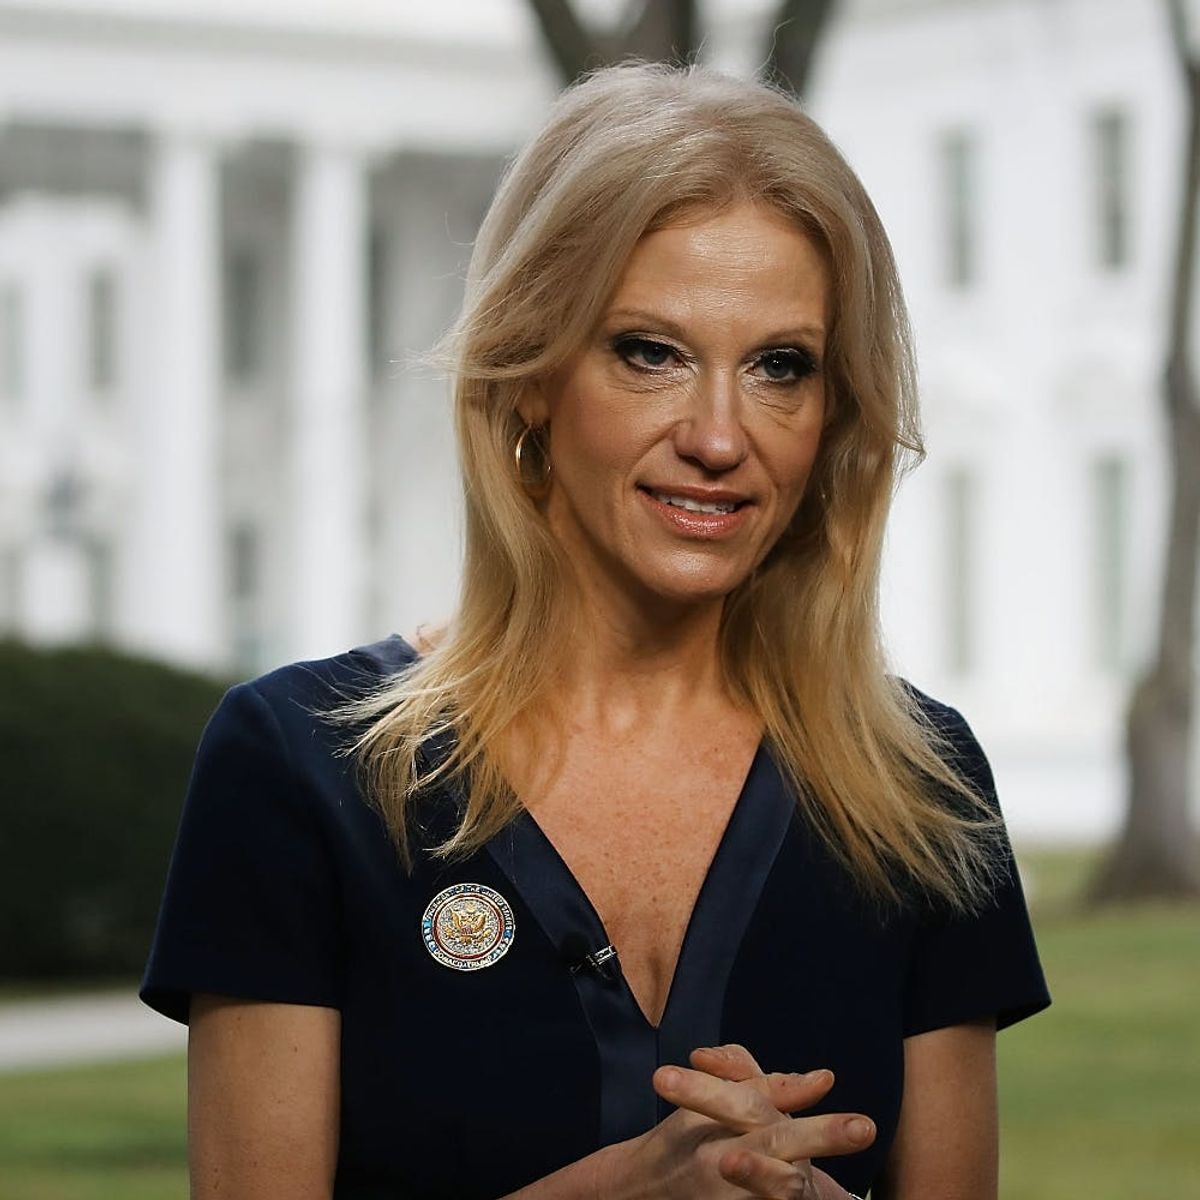 Cosmo Just Revealed Concerning New Info About Kellyanne Conway’s “Bowling Green Massacre”